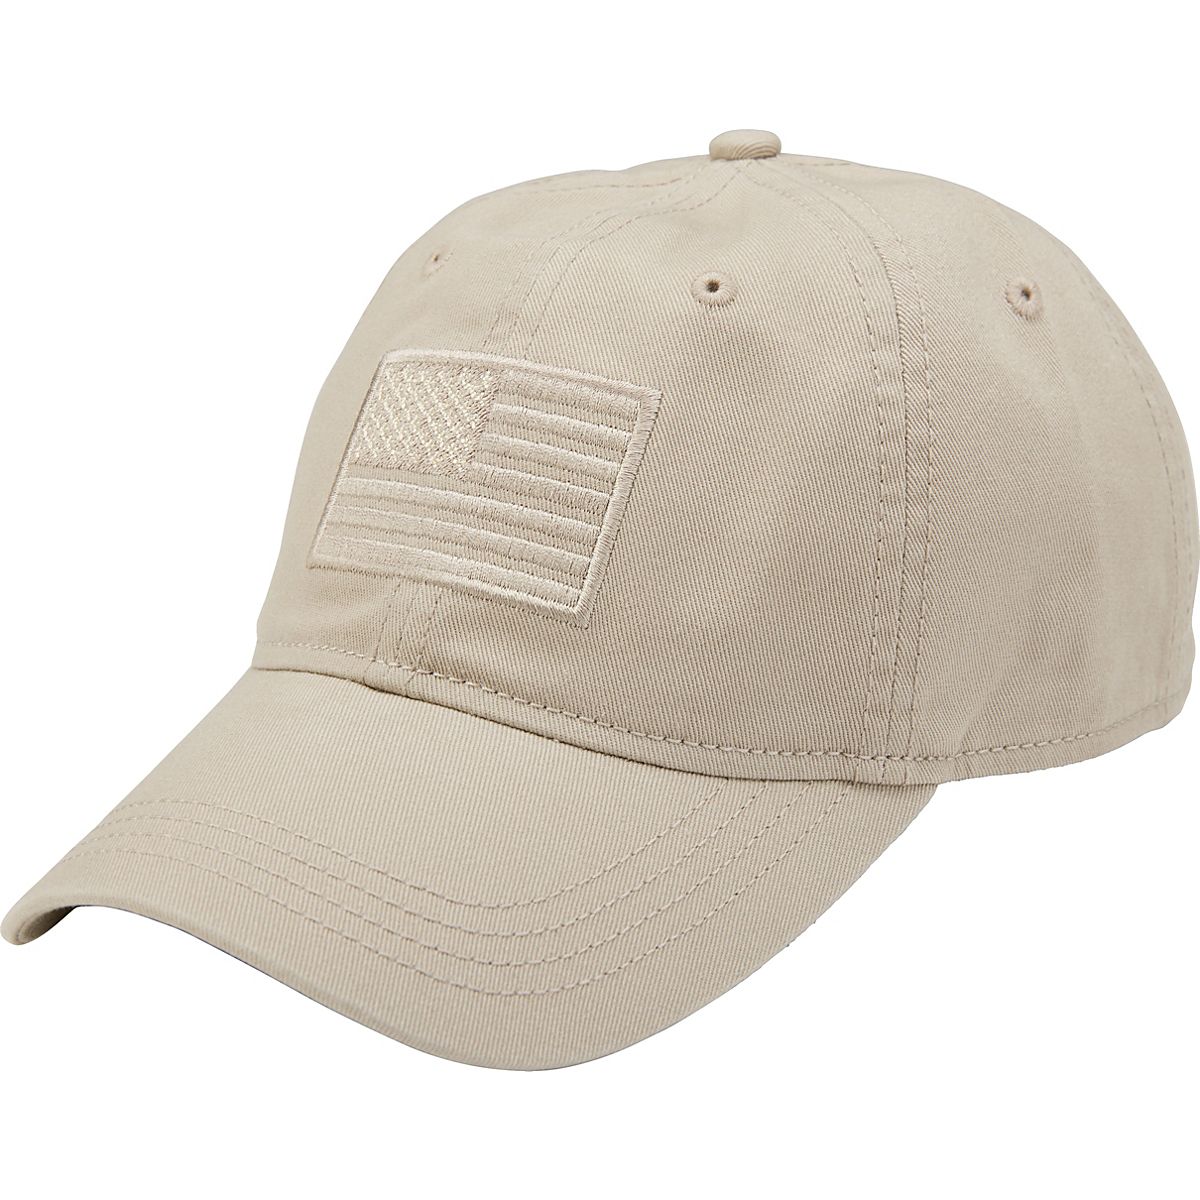 Academy Sports + Outdoors Men's Tonal American Flag Solid Twill